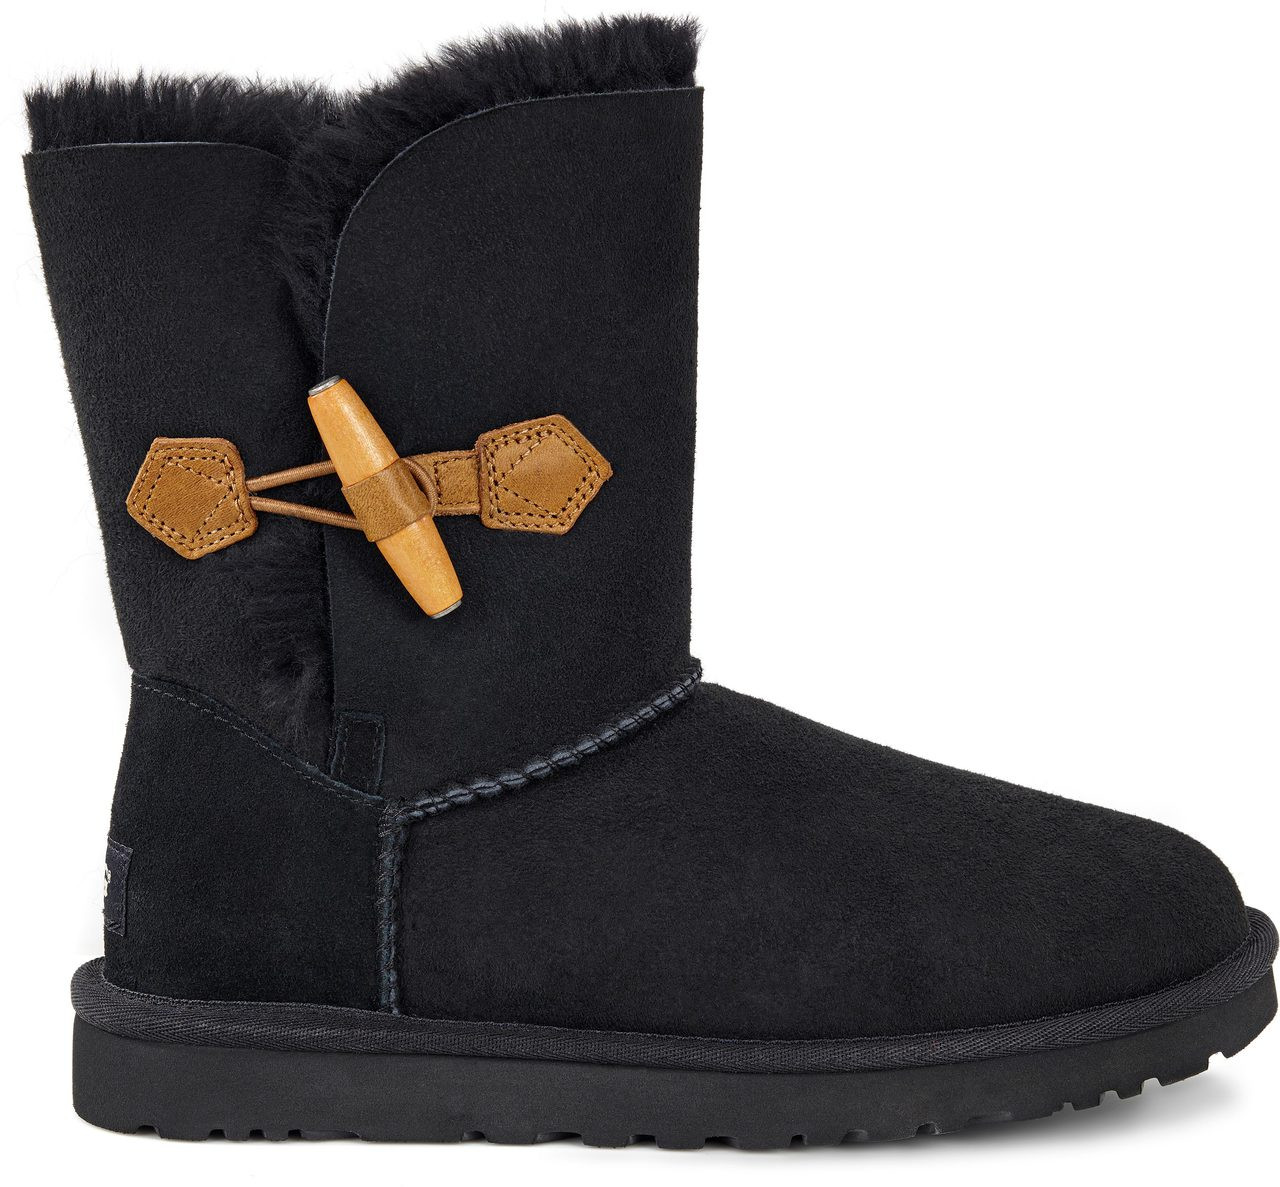 UGG Women's, Casual Boots, Mid-Calf Boots